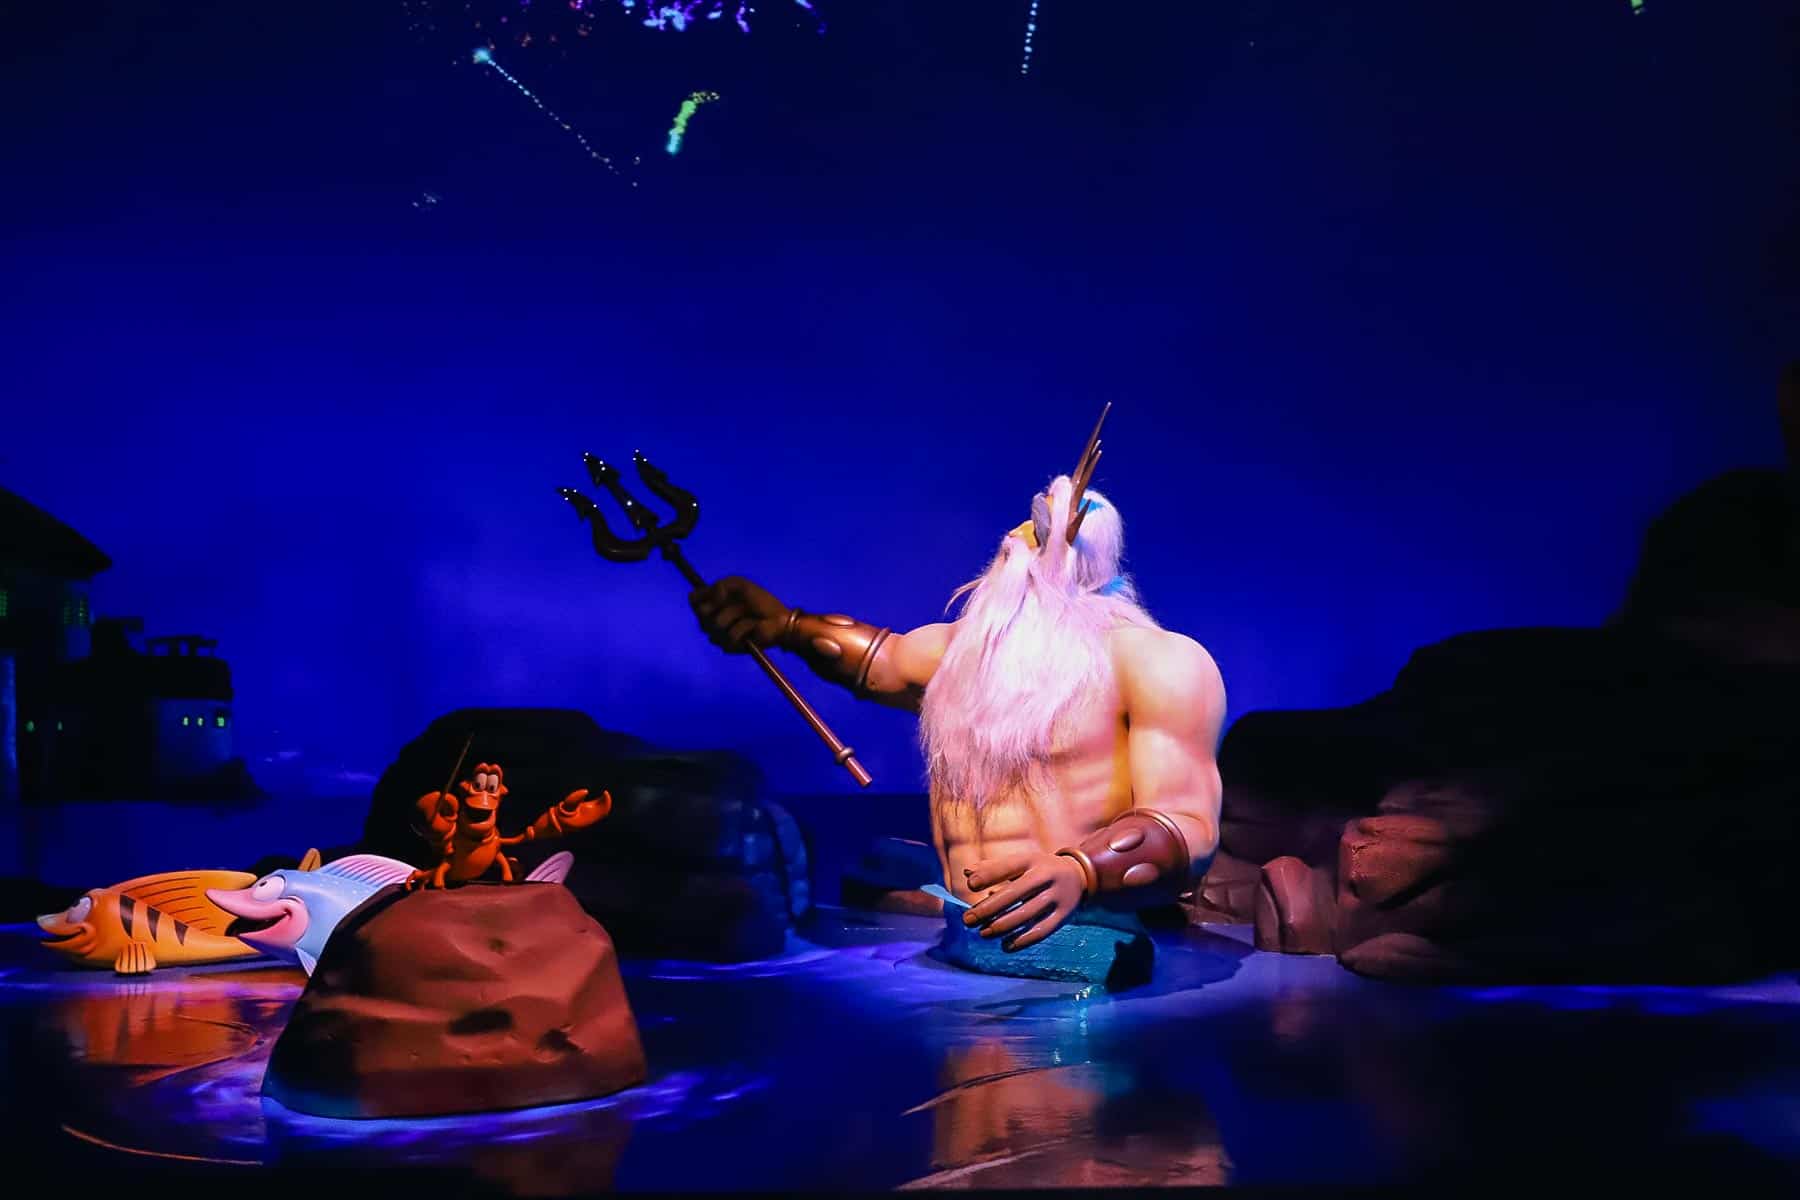 King Triton makes fireworks explode in this scene while Sebastian conducts an orchestra. 